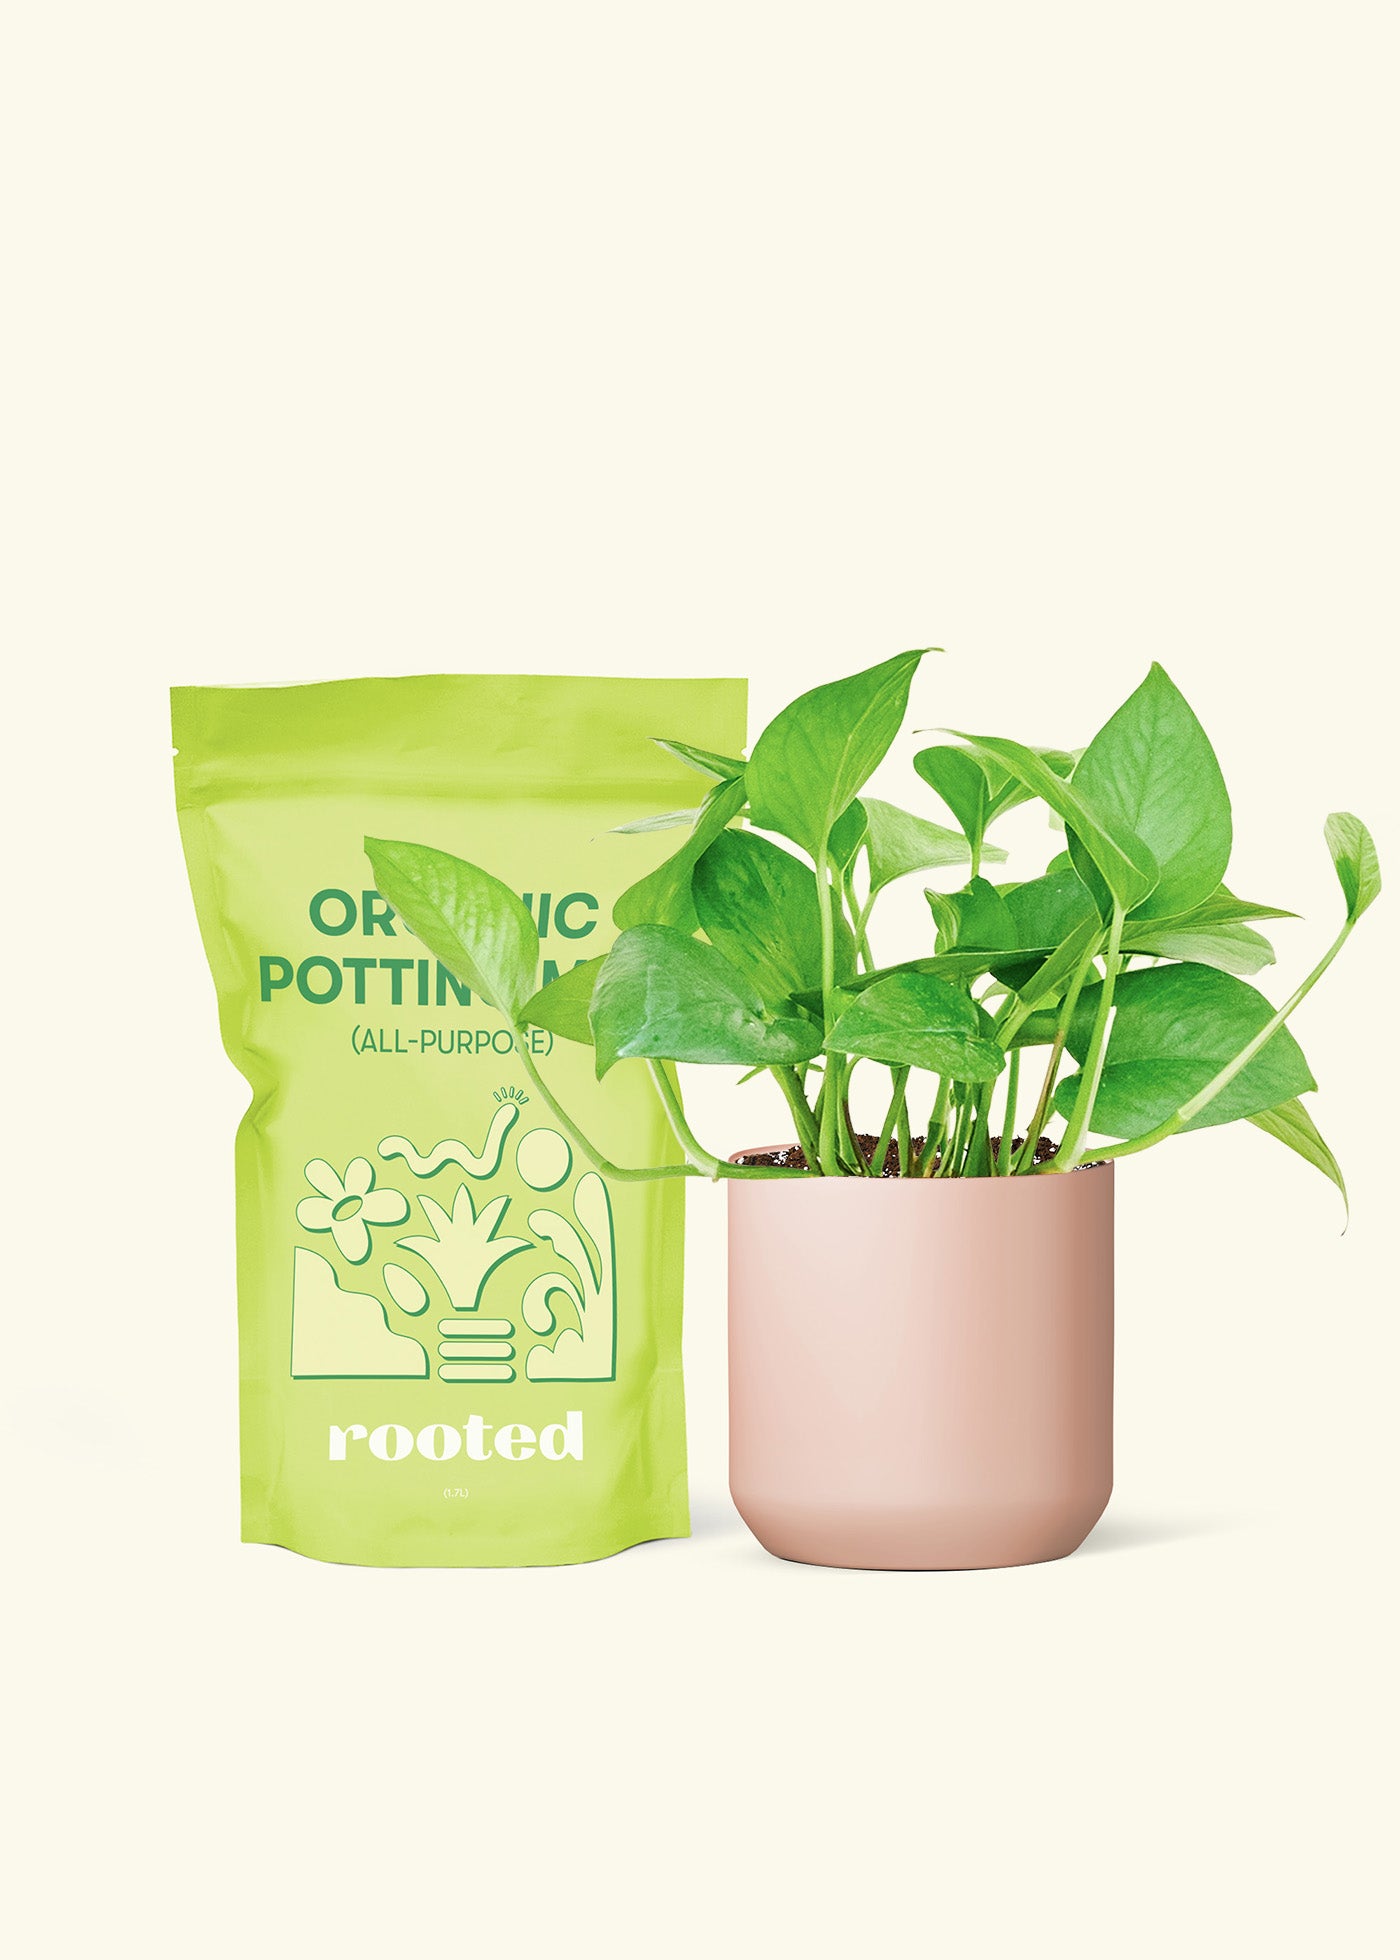 Jade Pothos With Scandinavian Pot Small 8 in tall, potted plant